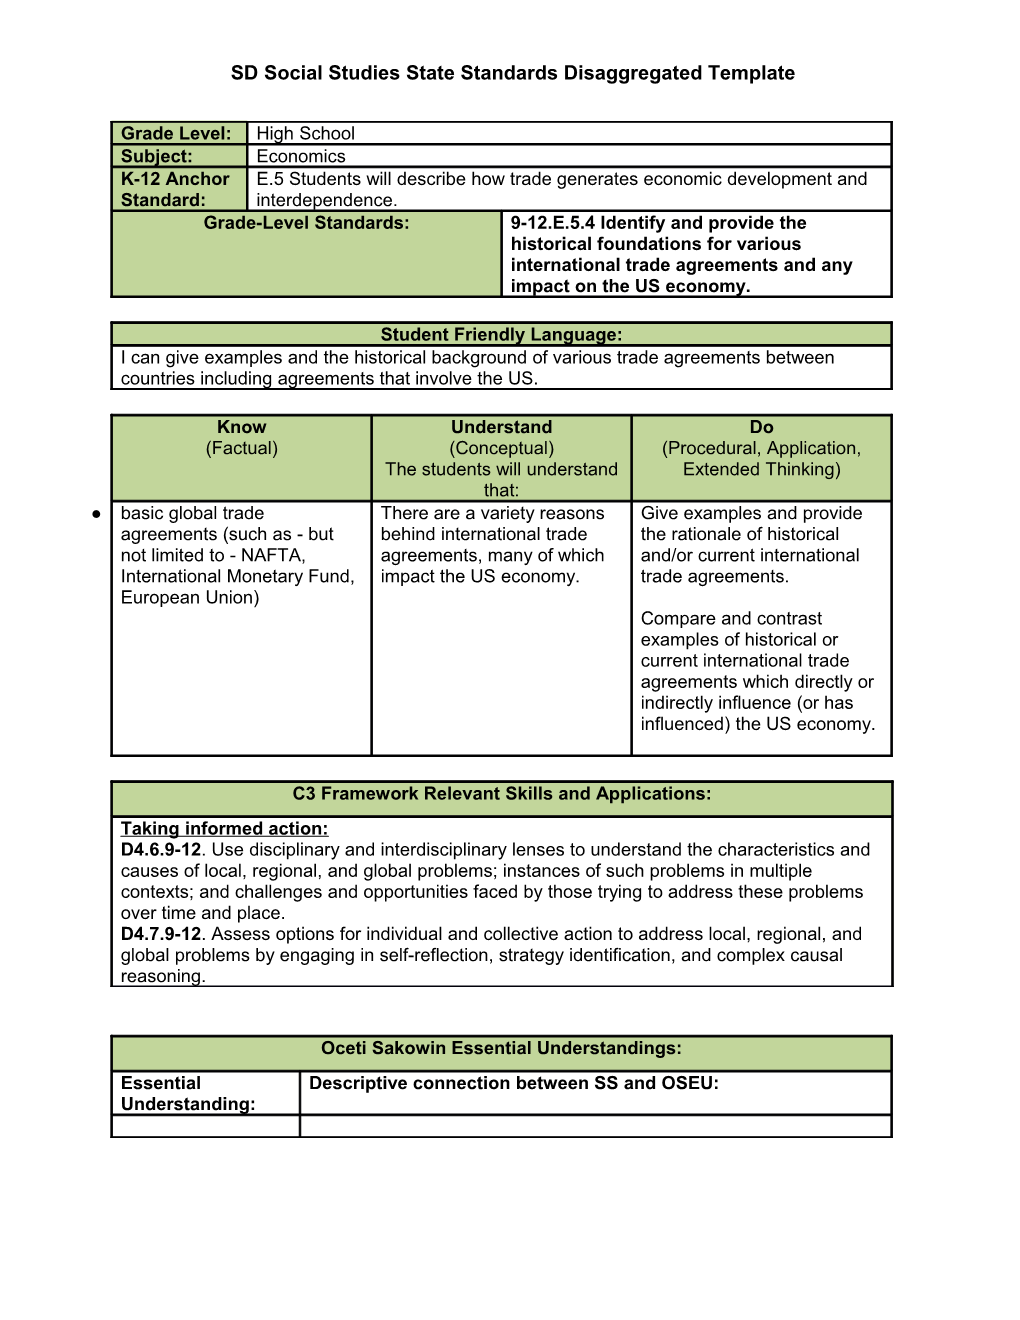 SD Social Studies State Standards Disaggregated Template